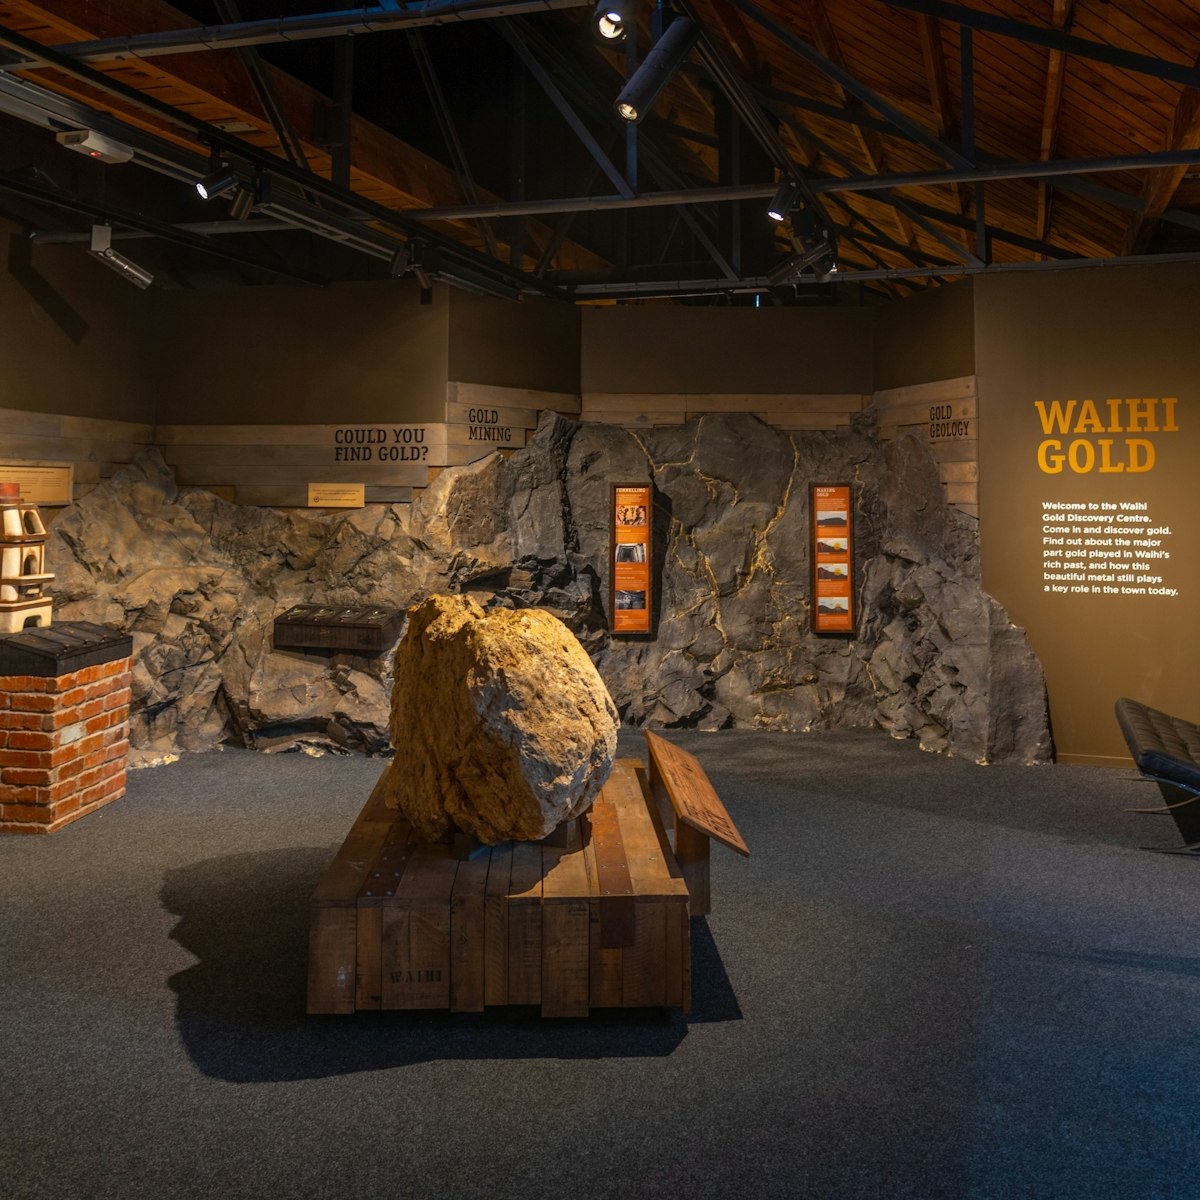 Gold Discovery Centre at Waihi, New Zealand.